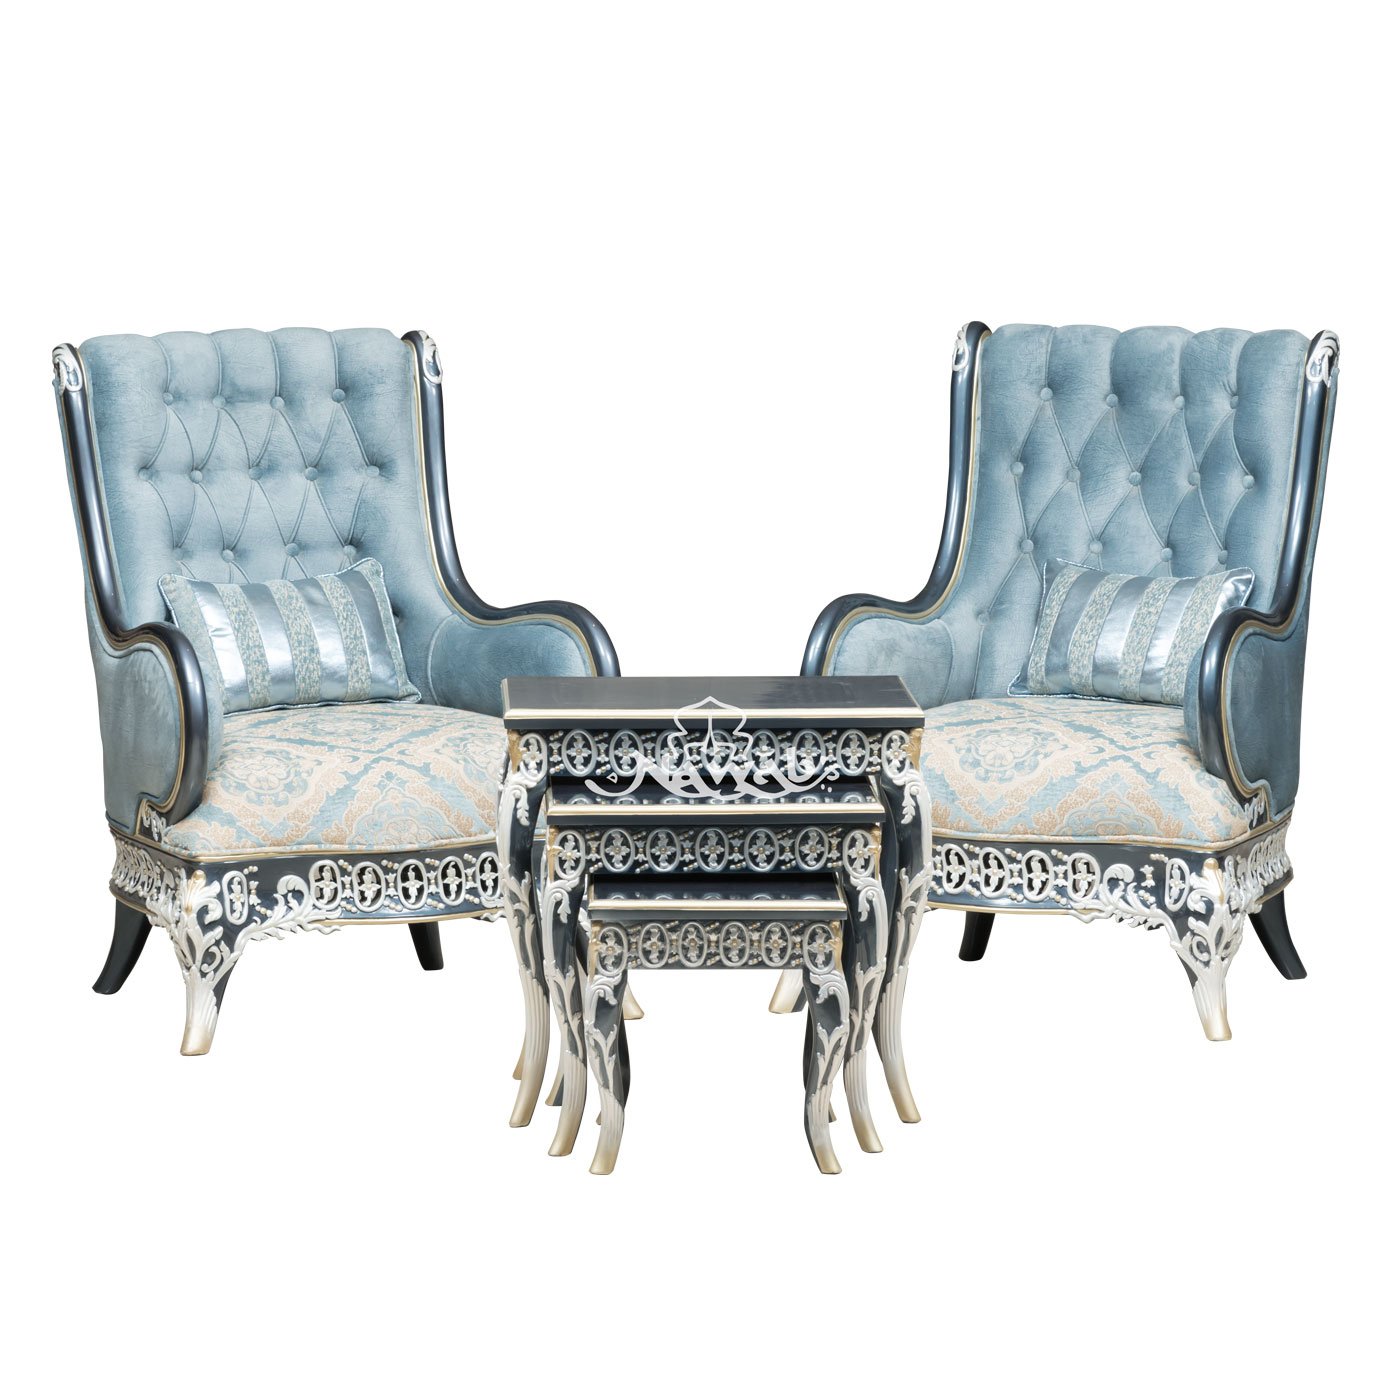 1-seater-teakwood-hand-carved-sofa-blue-white-pearl-polish-with-golden-lining-high-end-suede-upholstery-table-blue-onyx-top